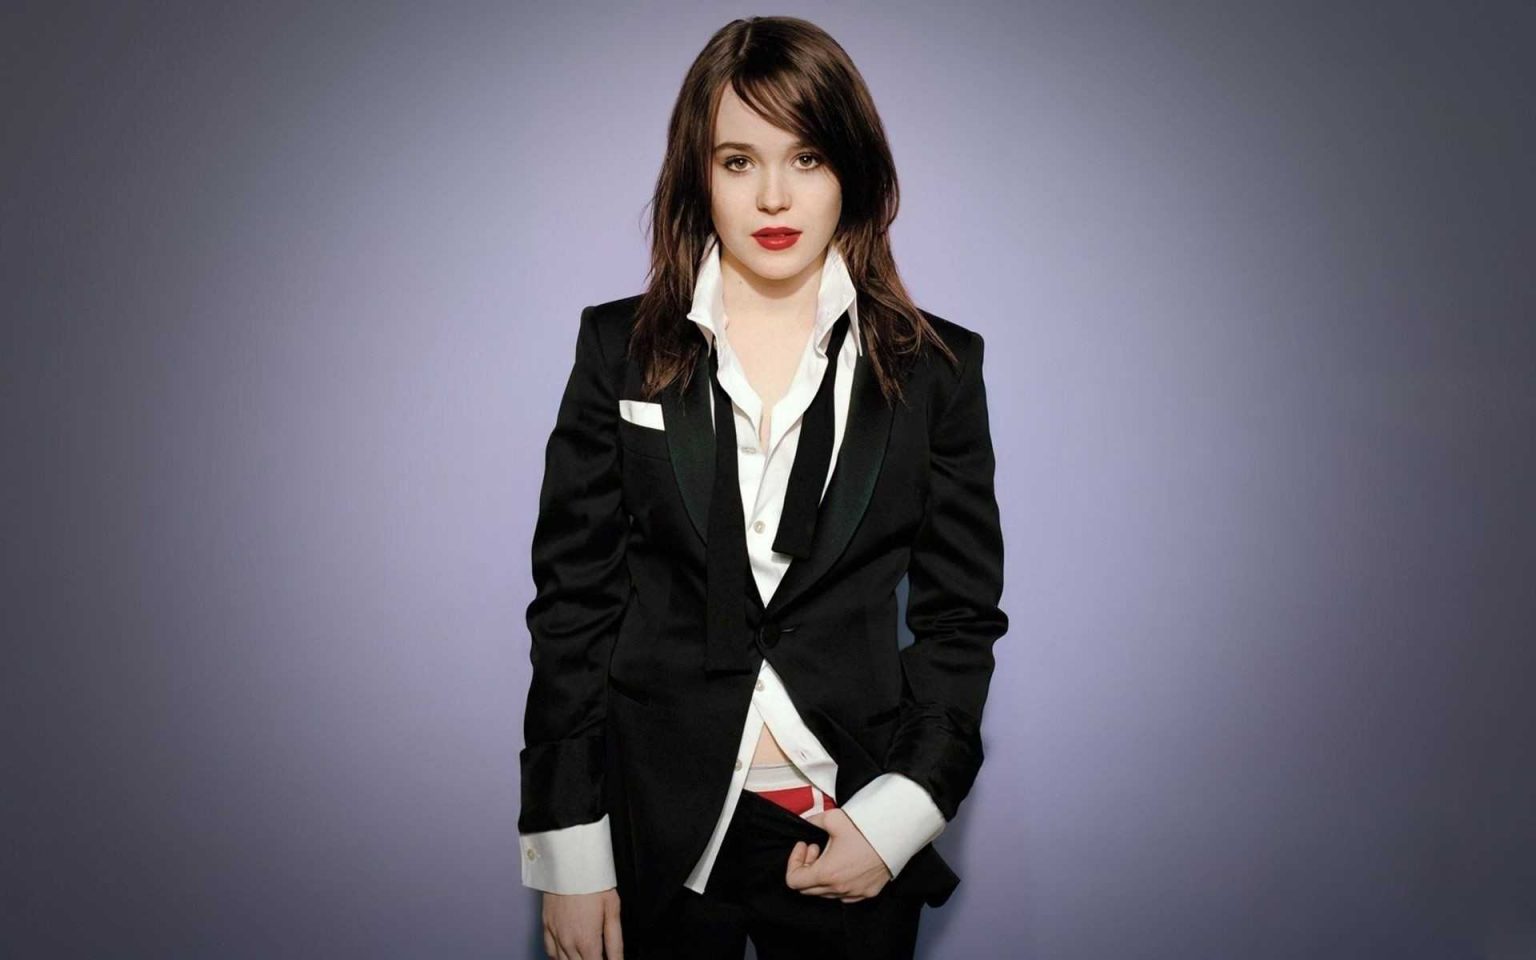 41 Ellen Page Nude Pictures Which Are Impressively Intriguing 454